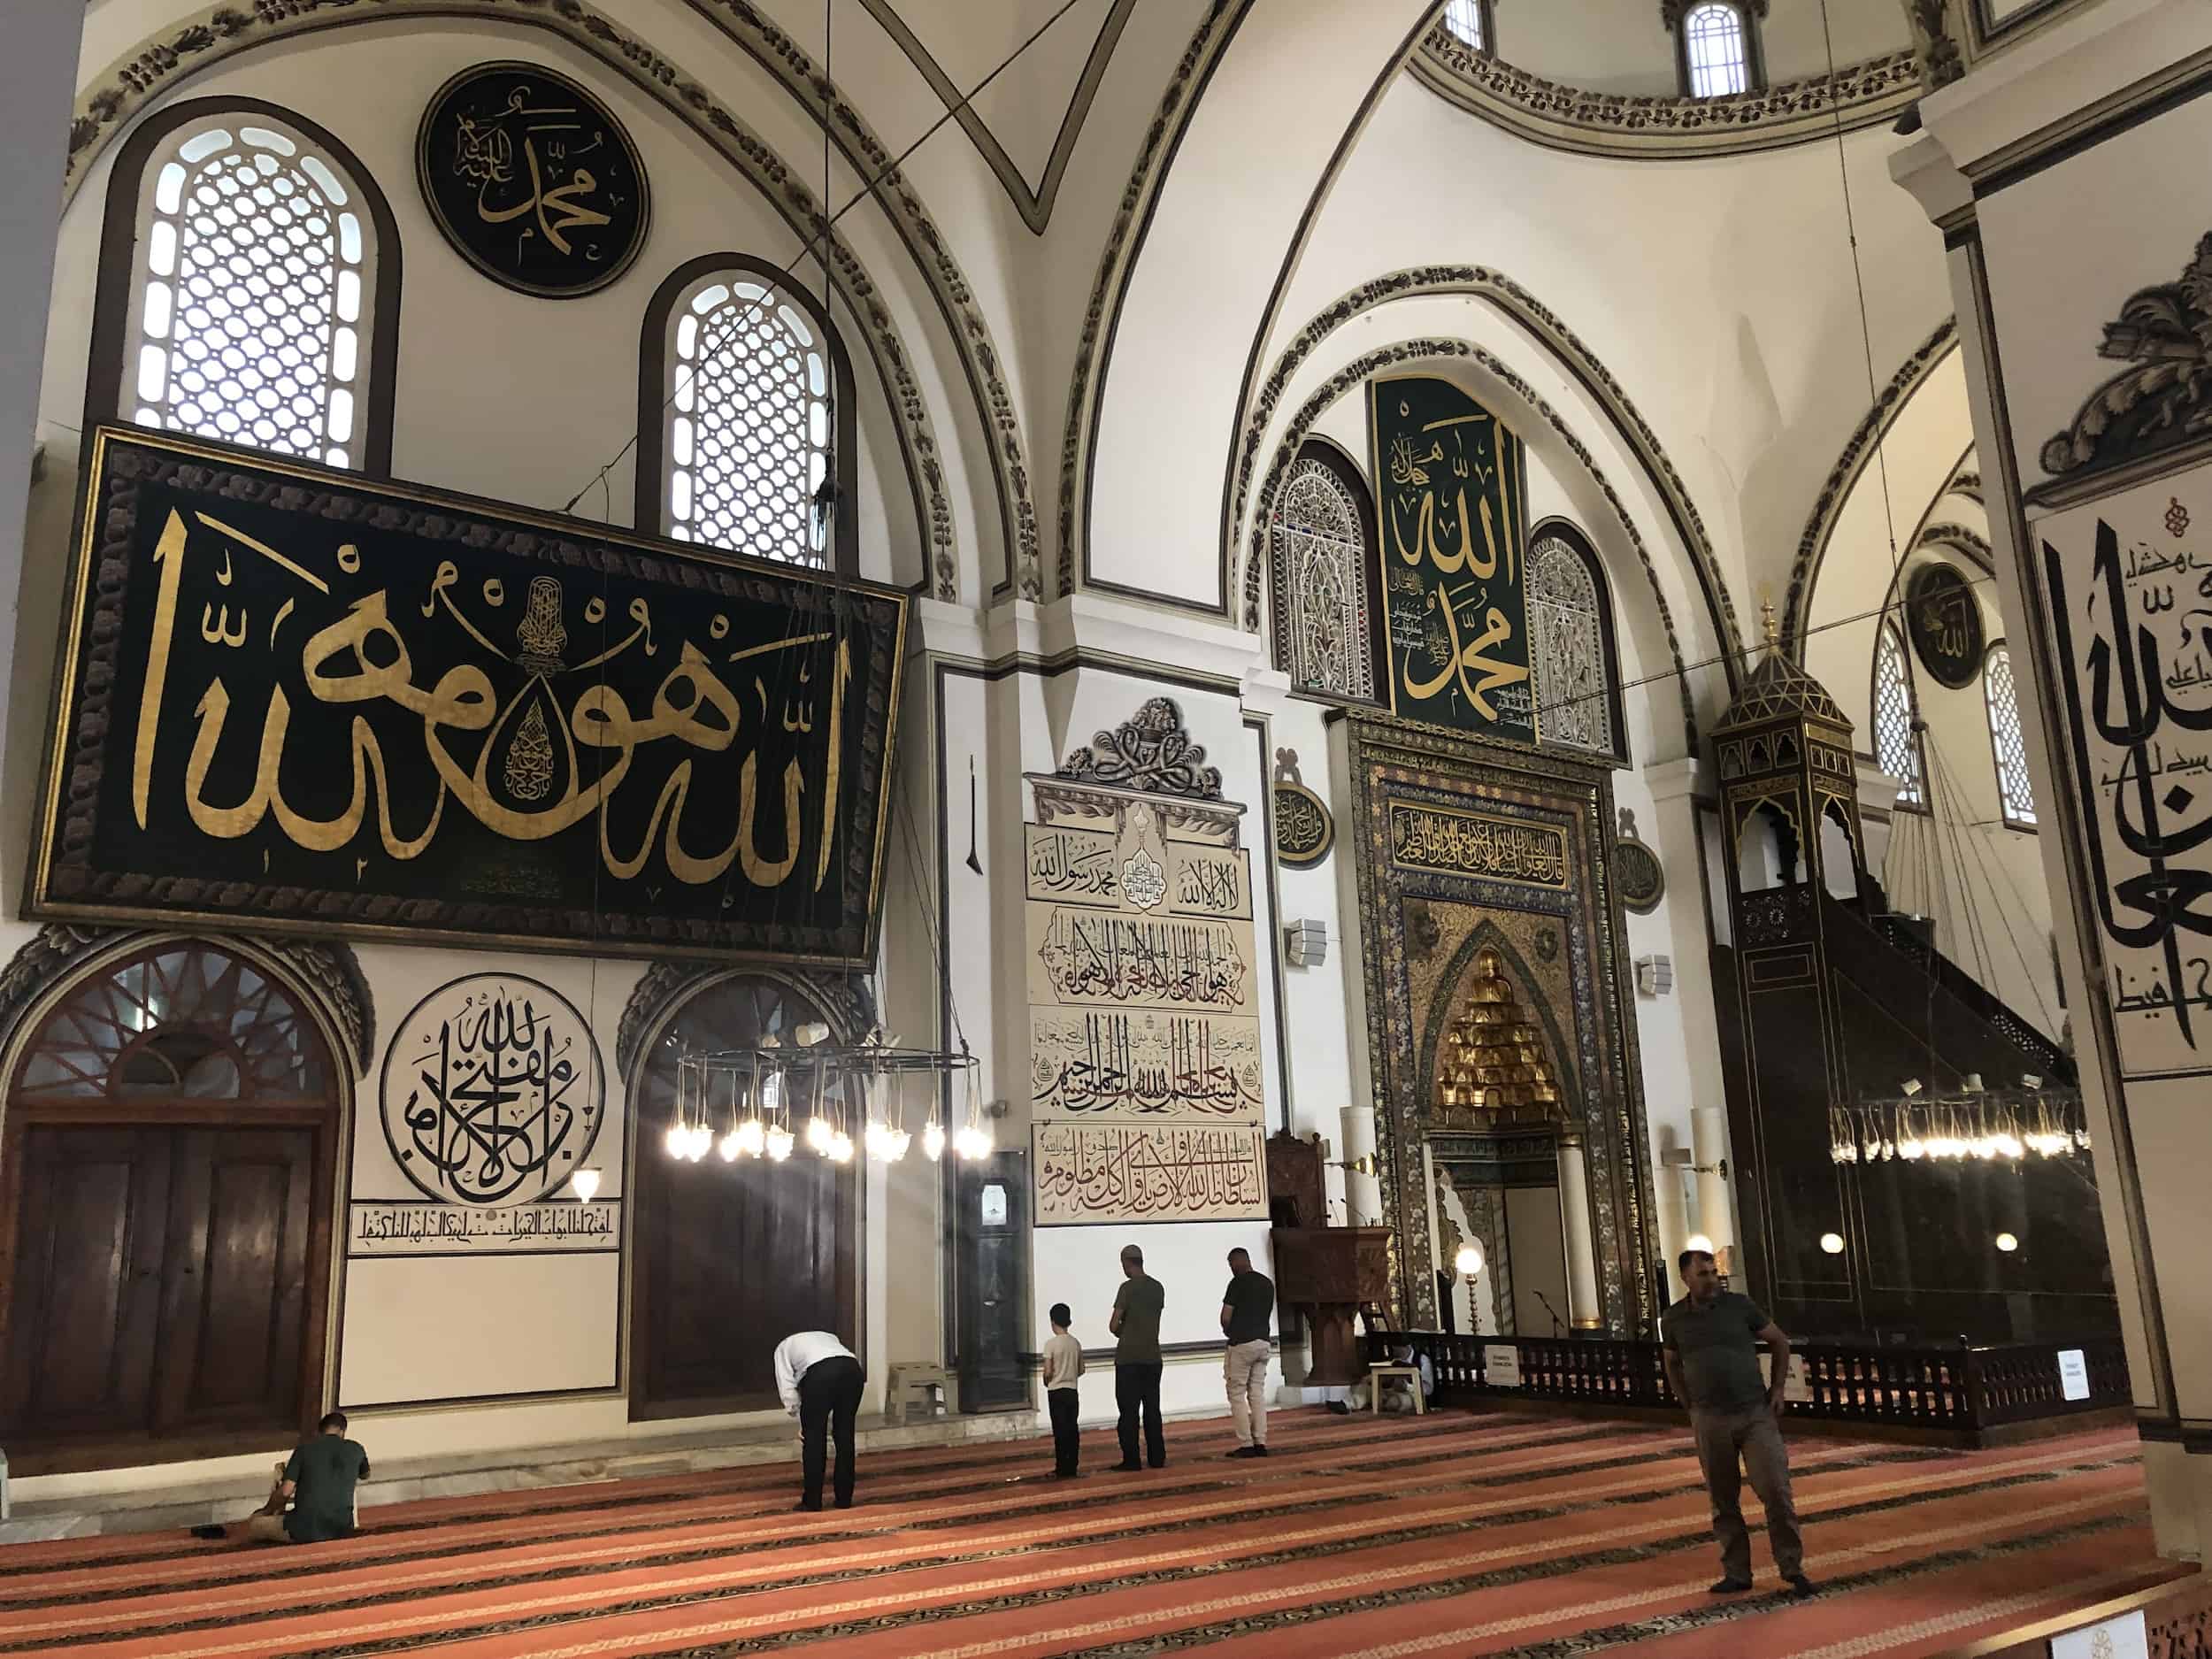 Calligraphy at the Grand Mosque in Bursa, Turkey